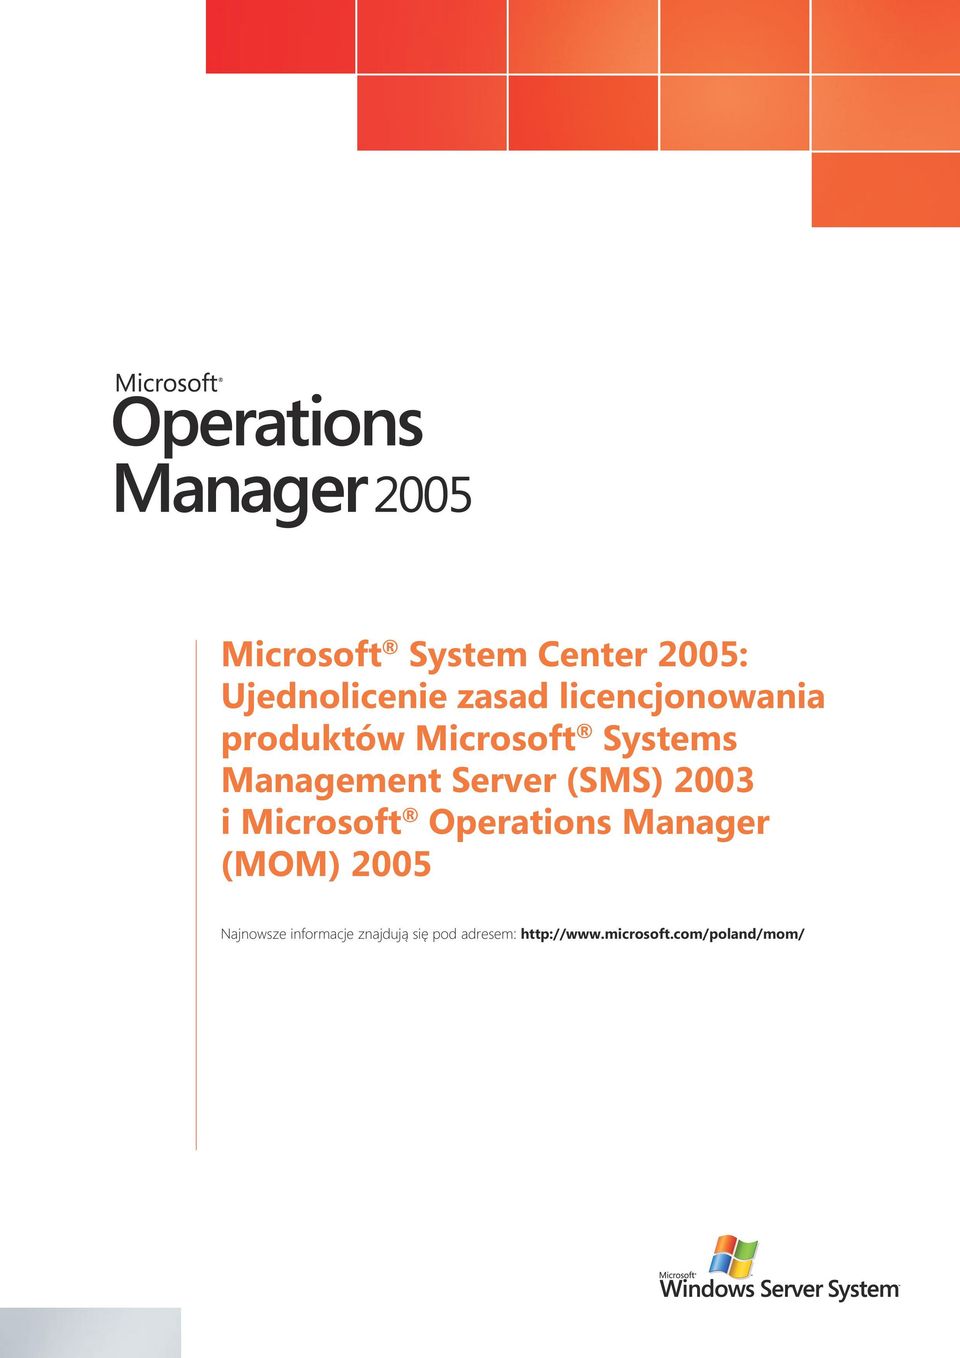 (SMS) 2003 i Microsoft perations Manager (MM) 2005 Najnowsze